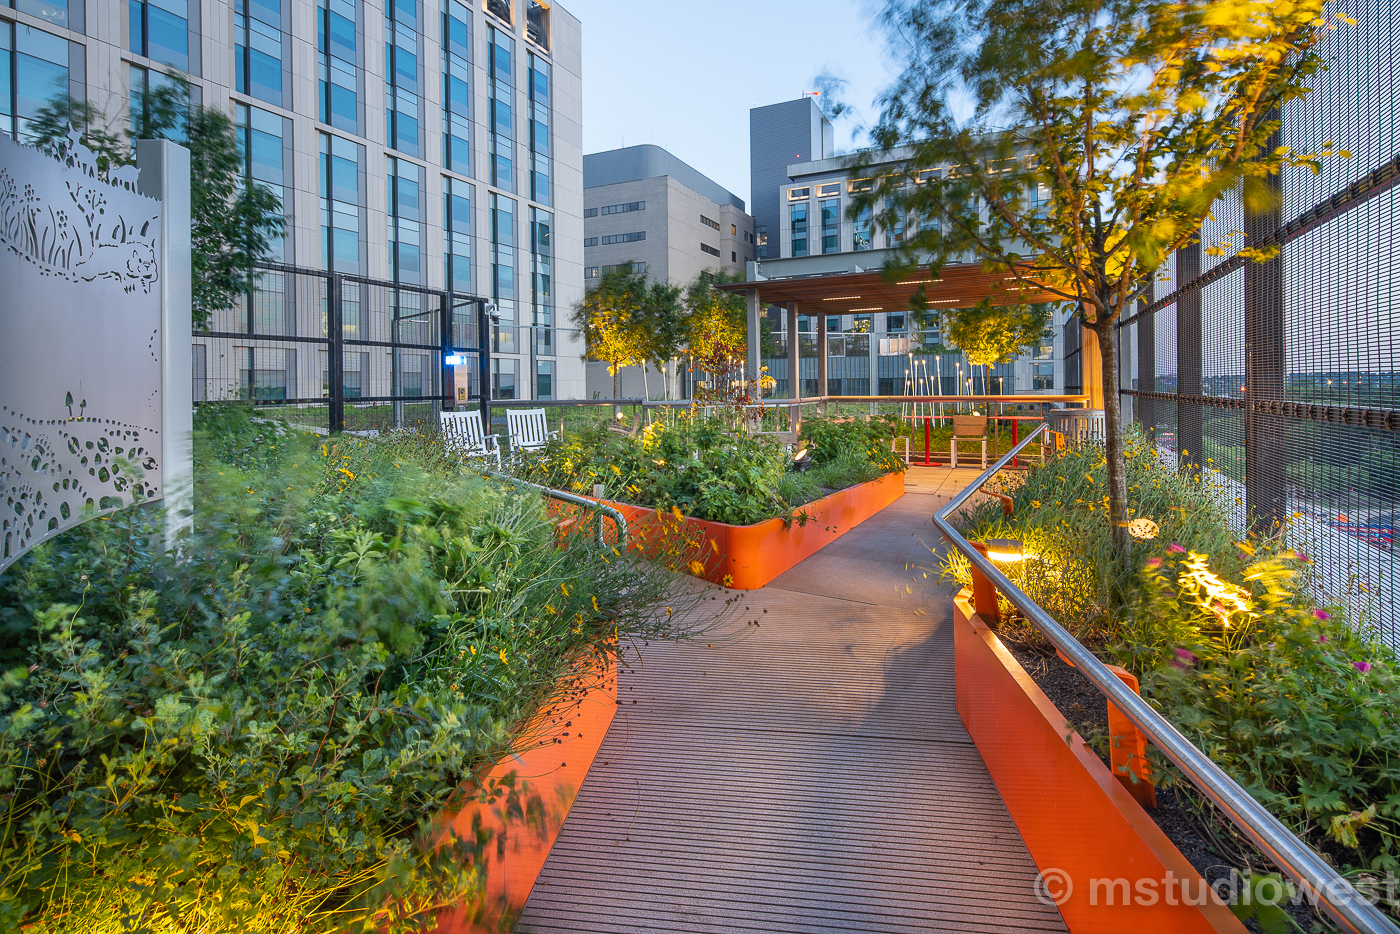 A rooftop garden was created for the Women & Infants moms-to-be and families